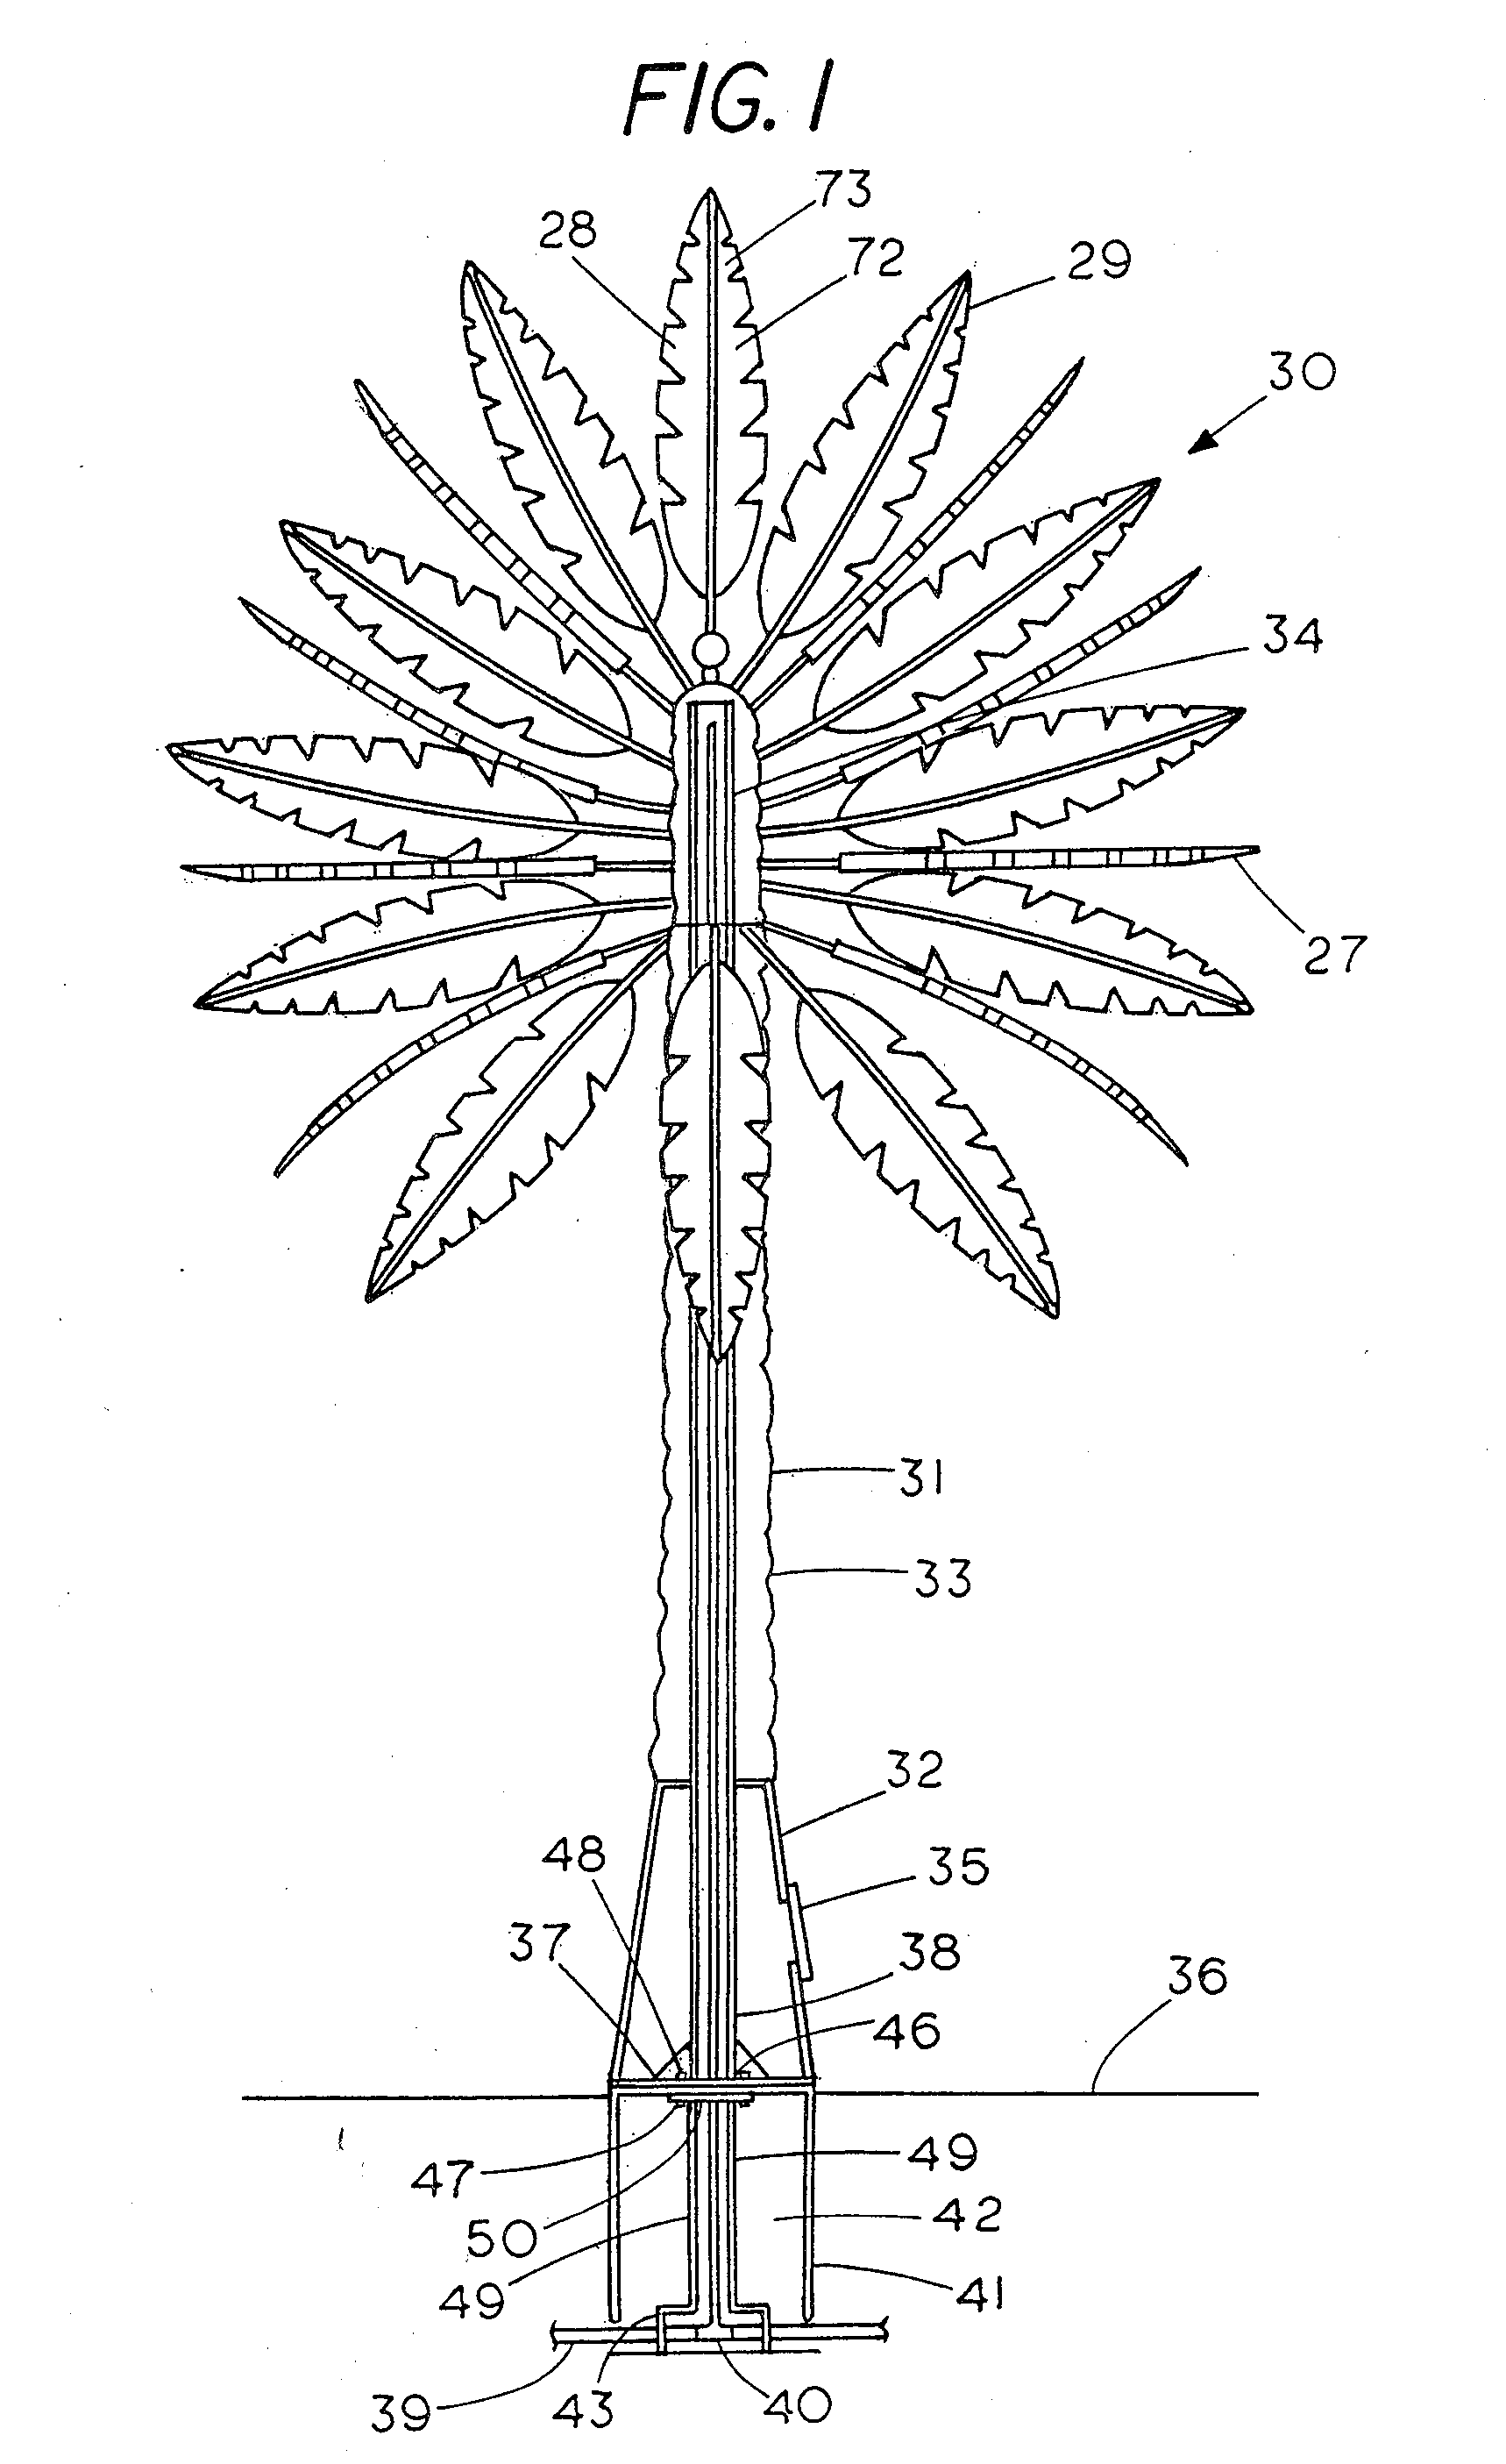 Solar array resembling natural foliage including means for wireless transmission of electric power